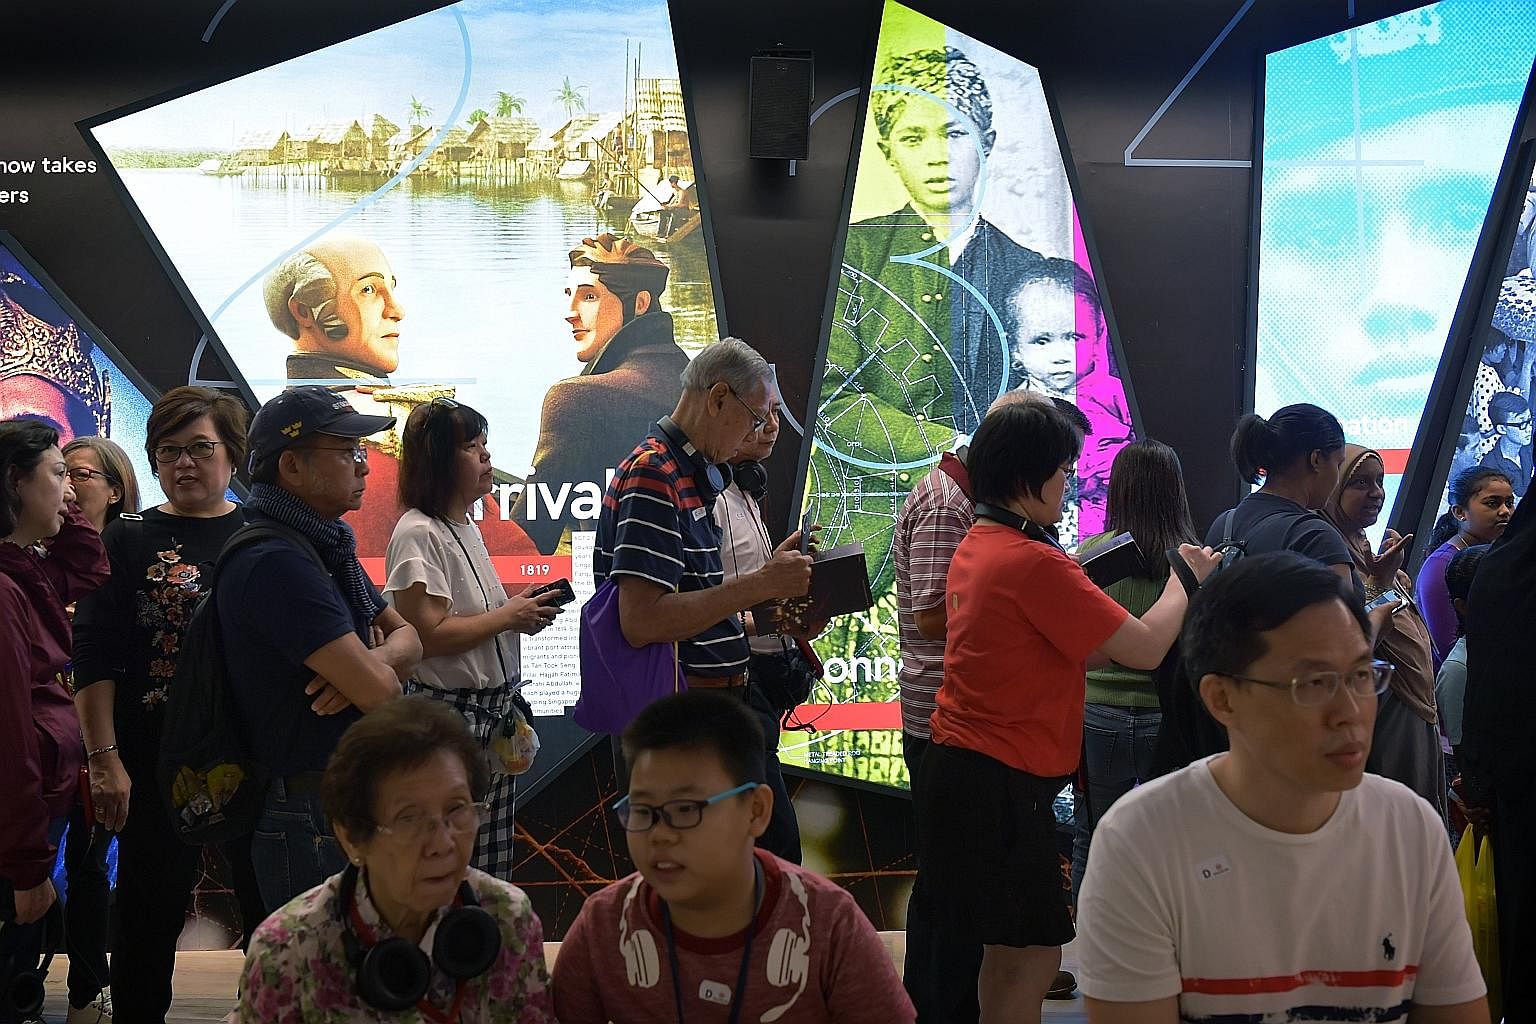 Visitors queueing up for the Bicentennial Experience at Fort Canning Centre. Our debates about identity - be it personal or national - have to take place in a wider regional context where we need to reconnect with our region as a whole, says the writ